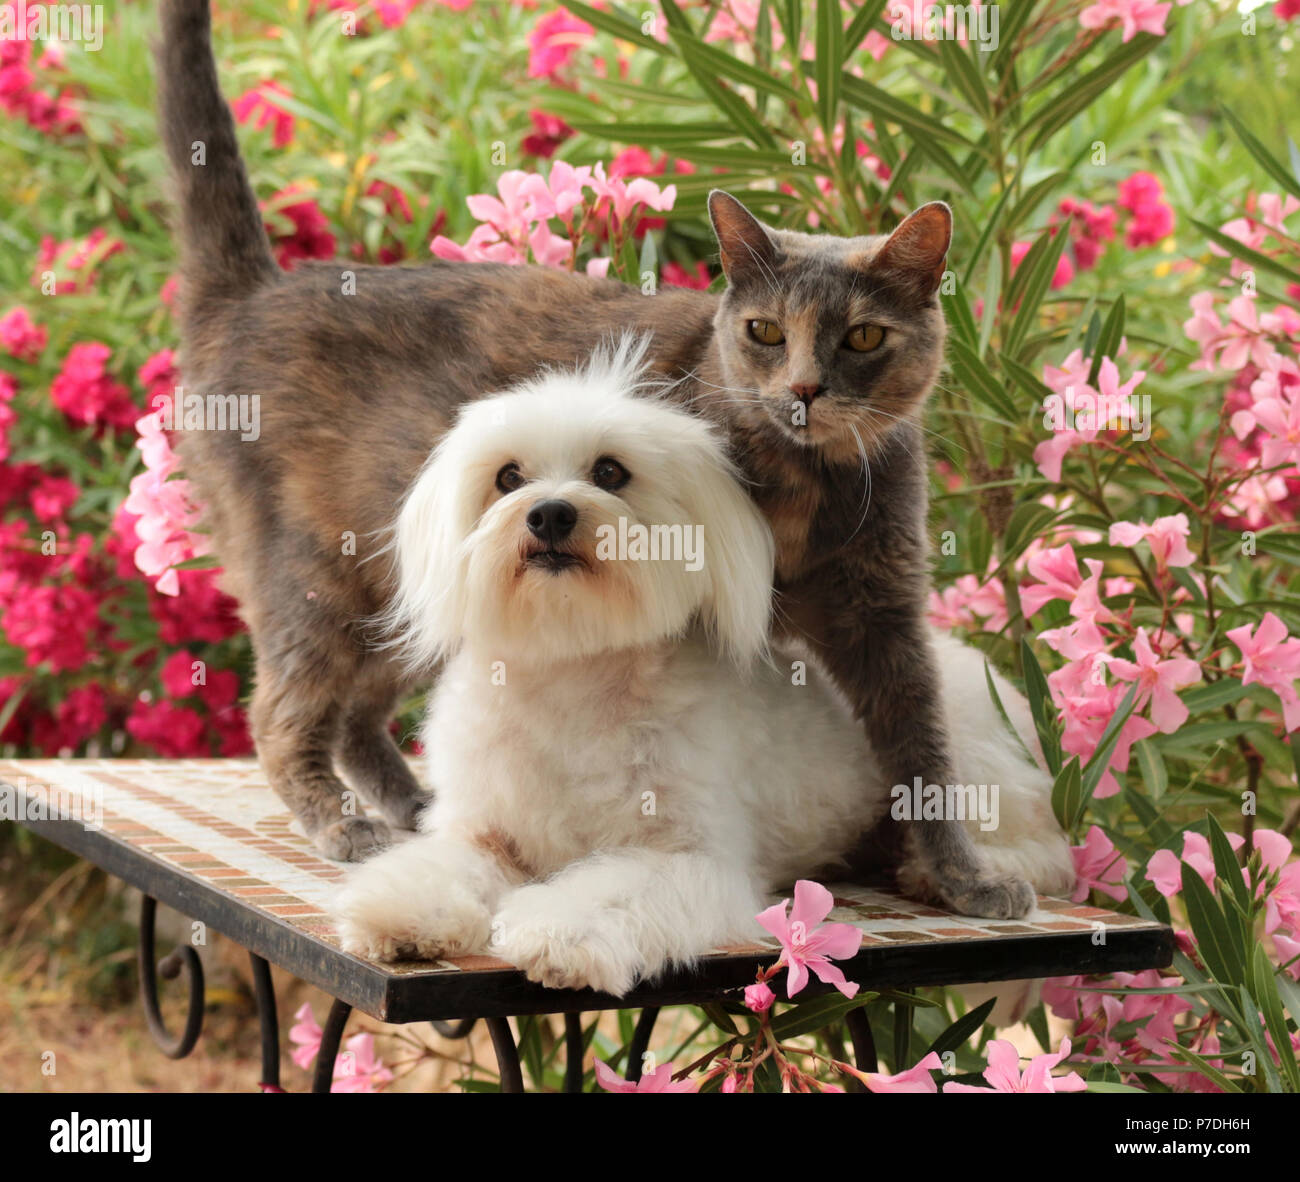 maltese dog and domestic cat in the garden Stock Photo